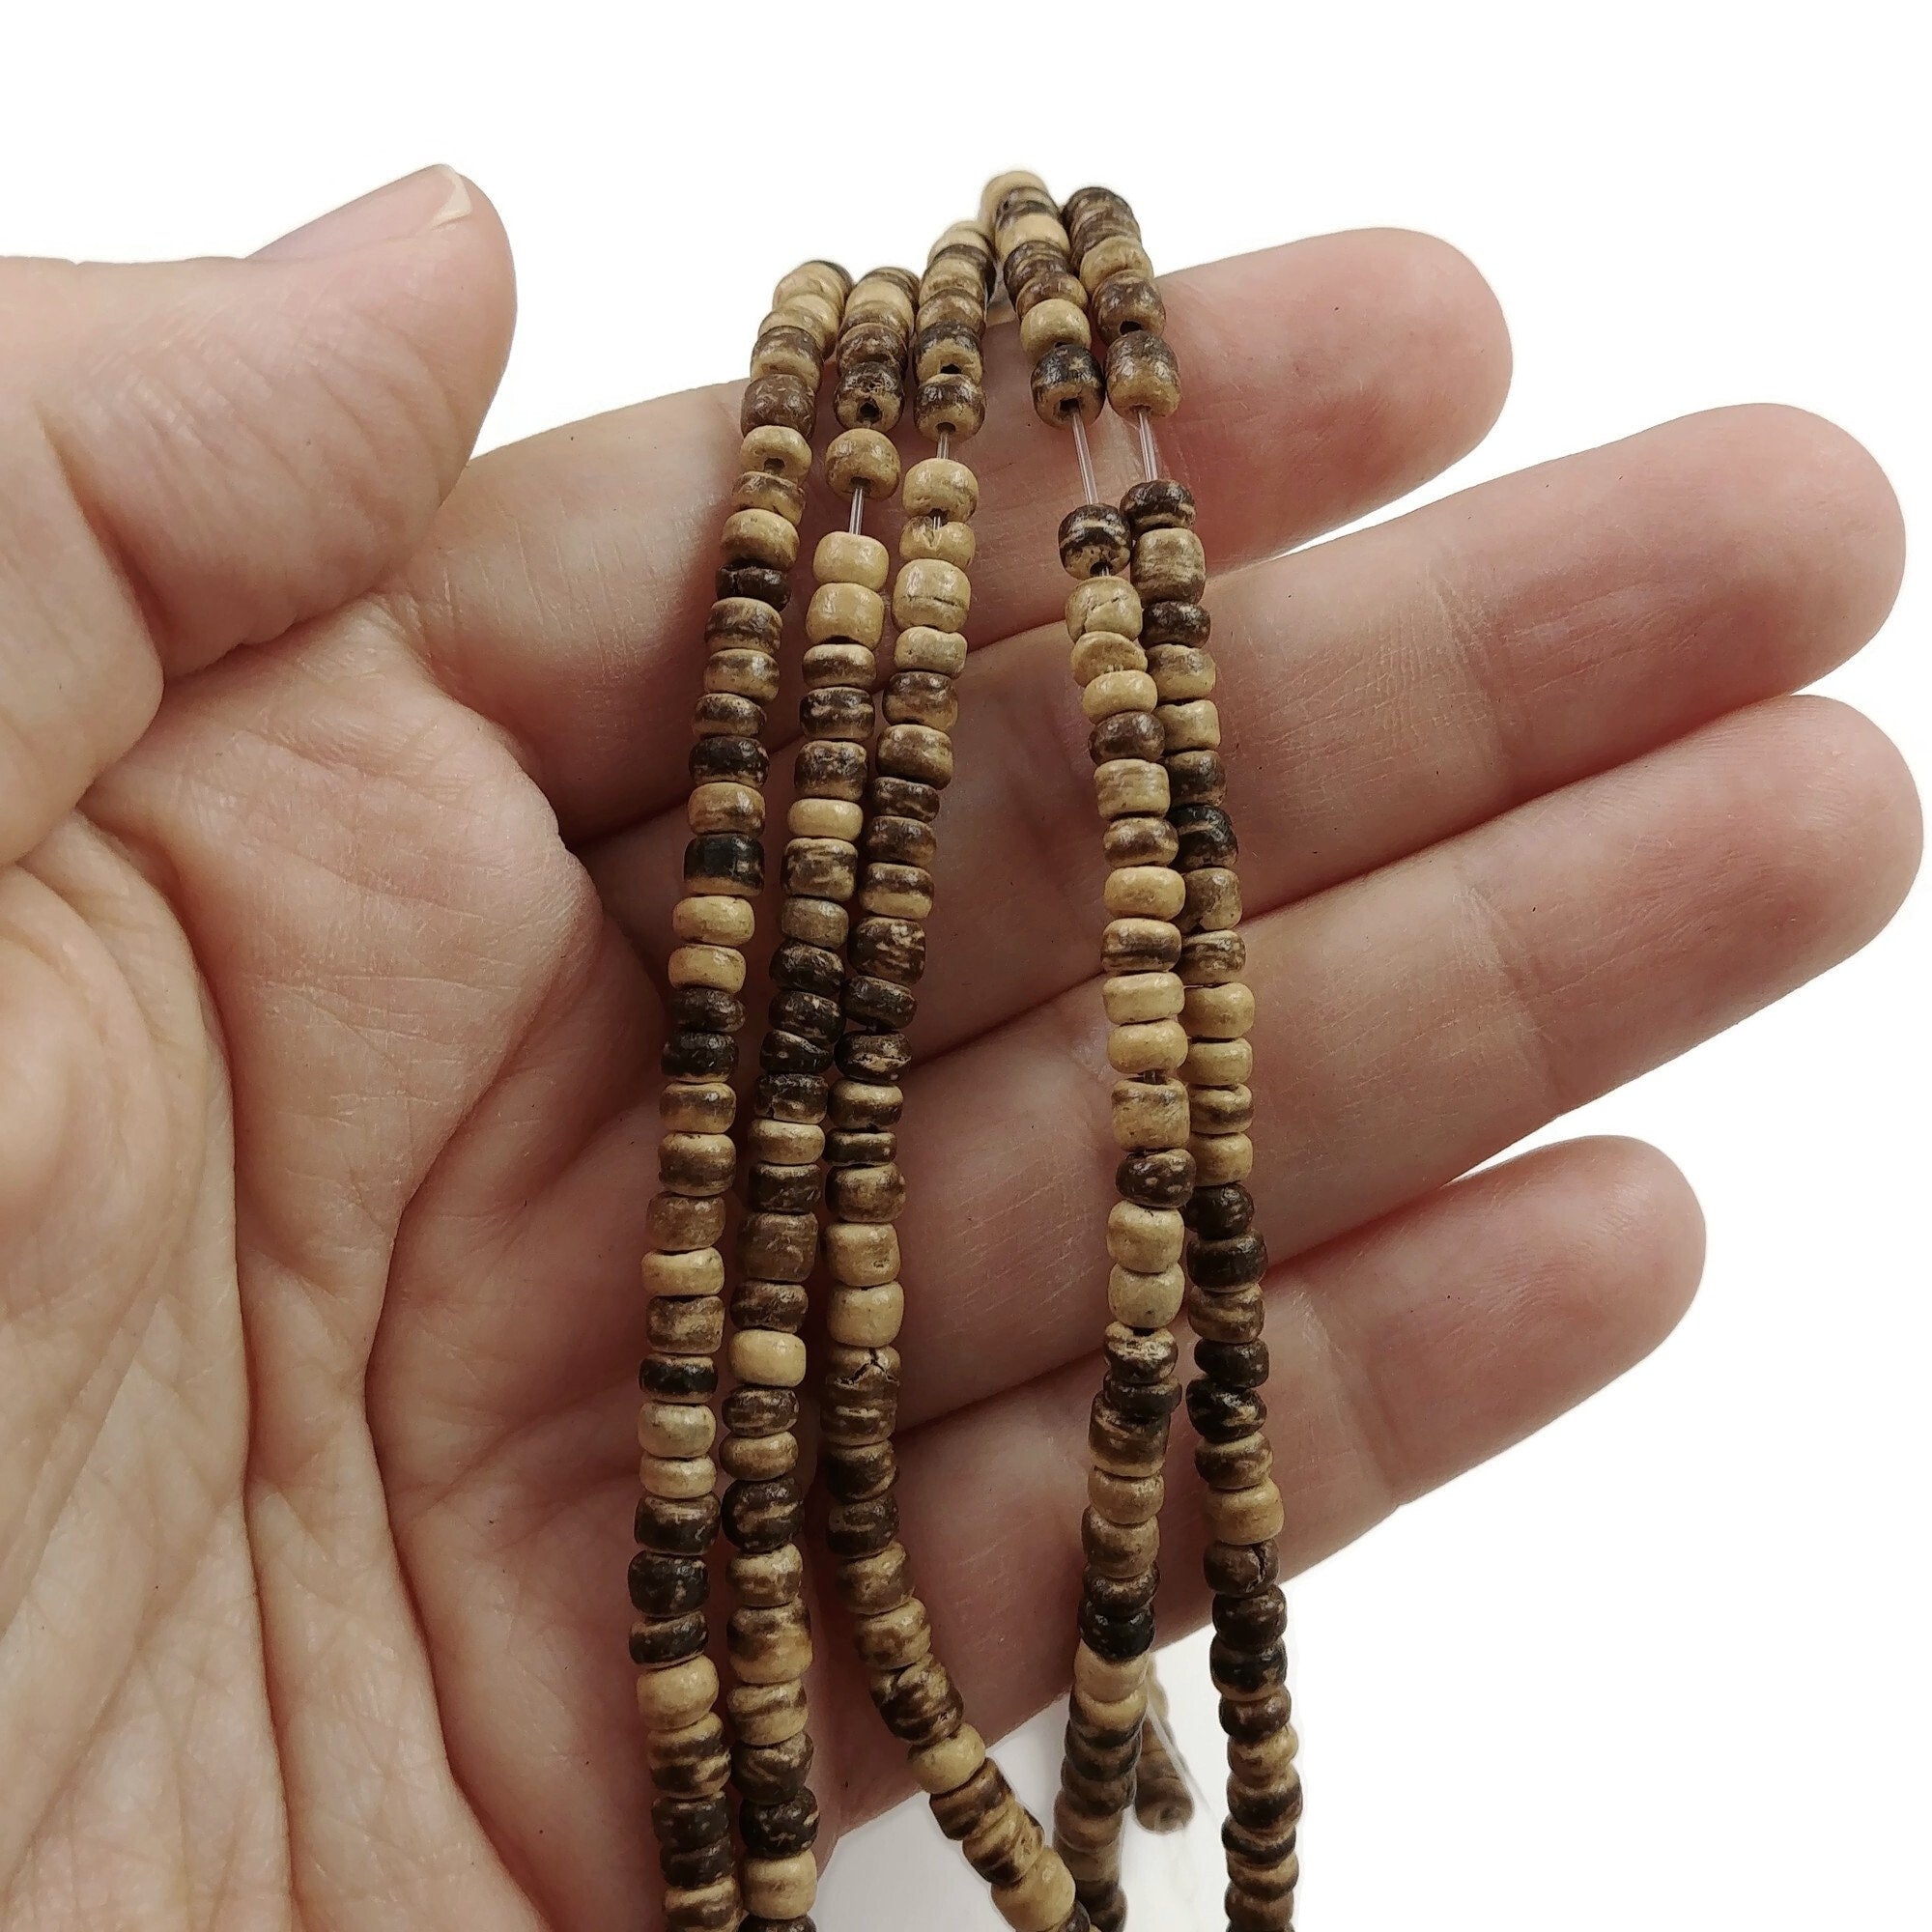 Tiny brown and beige coconut beads 2-3mm, Natural wooden seed beads, Jewelry making bracelet beads